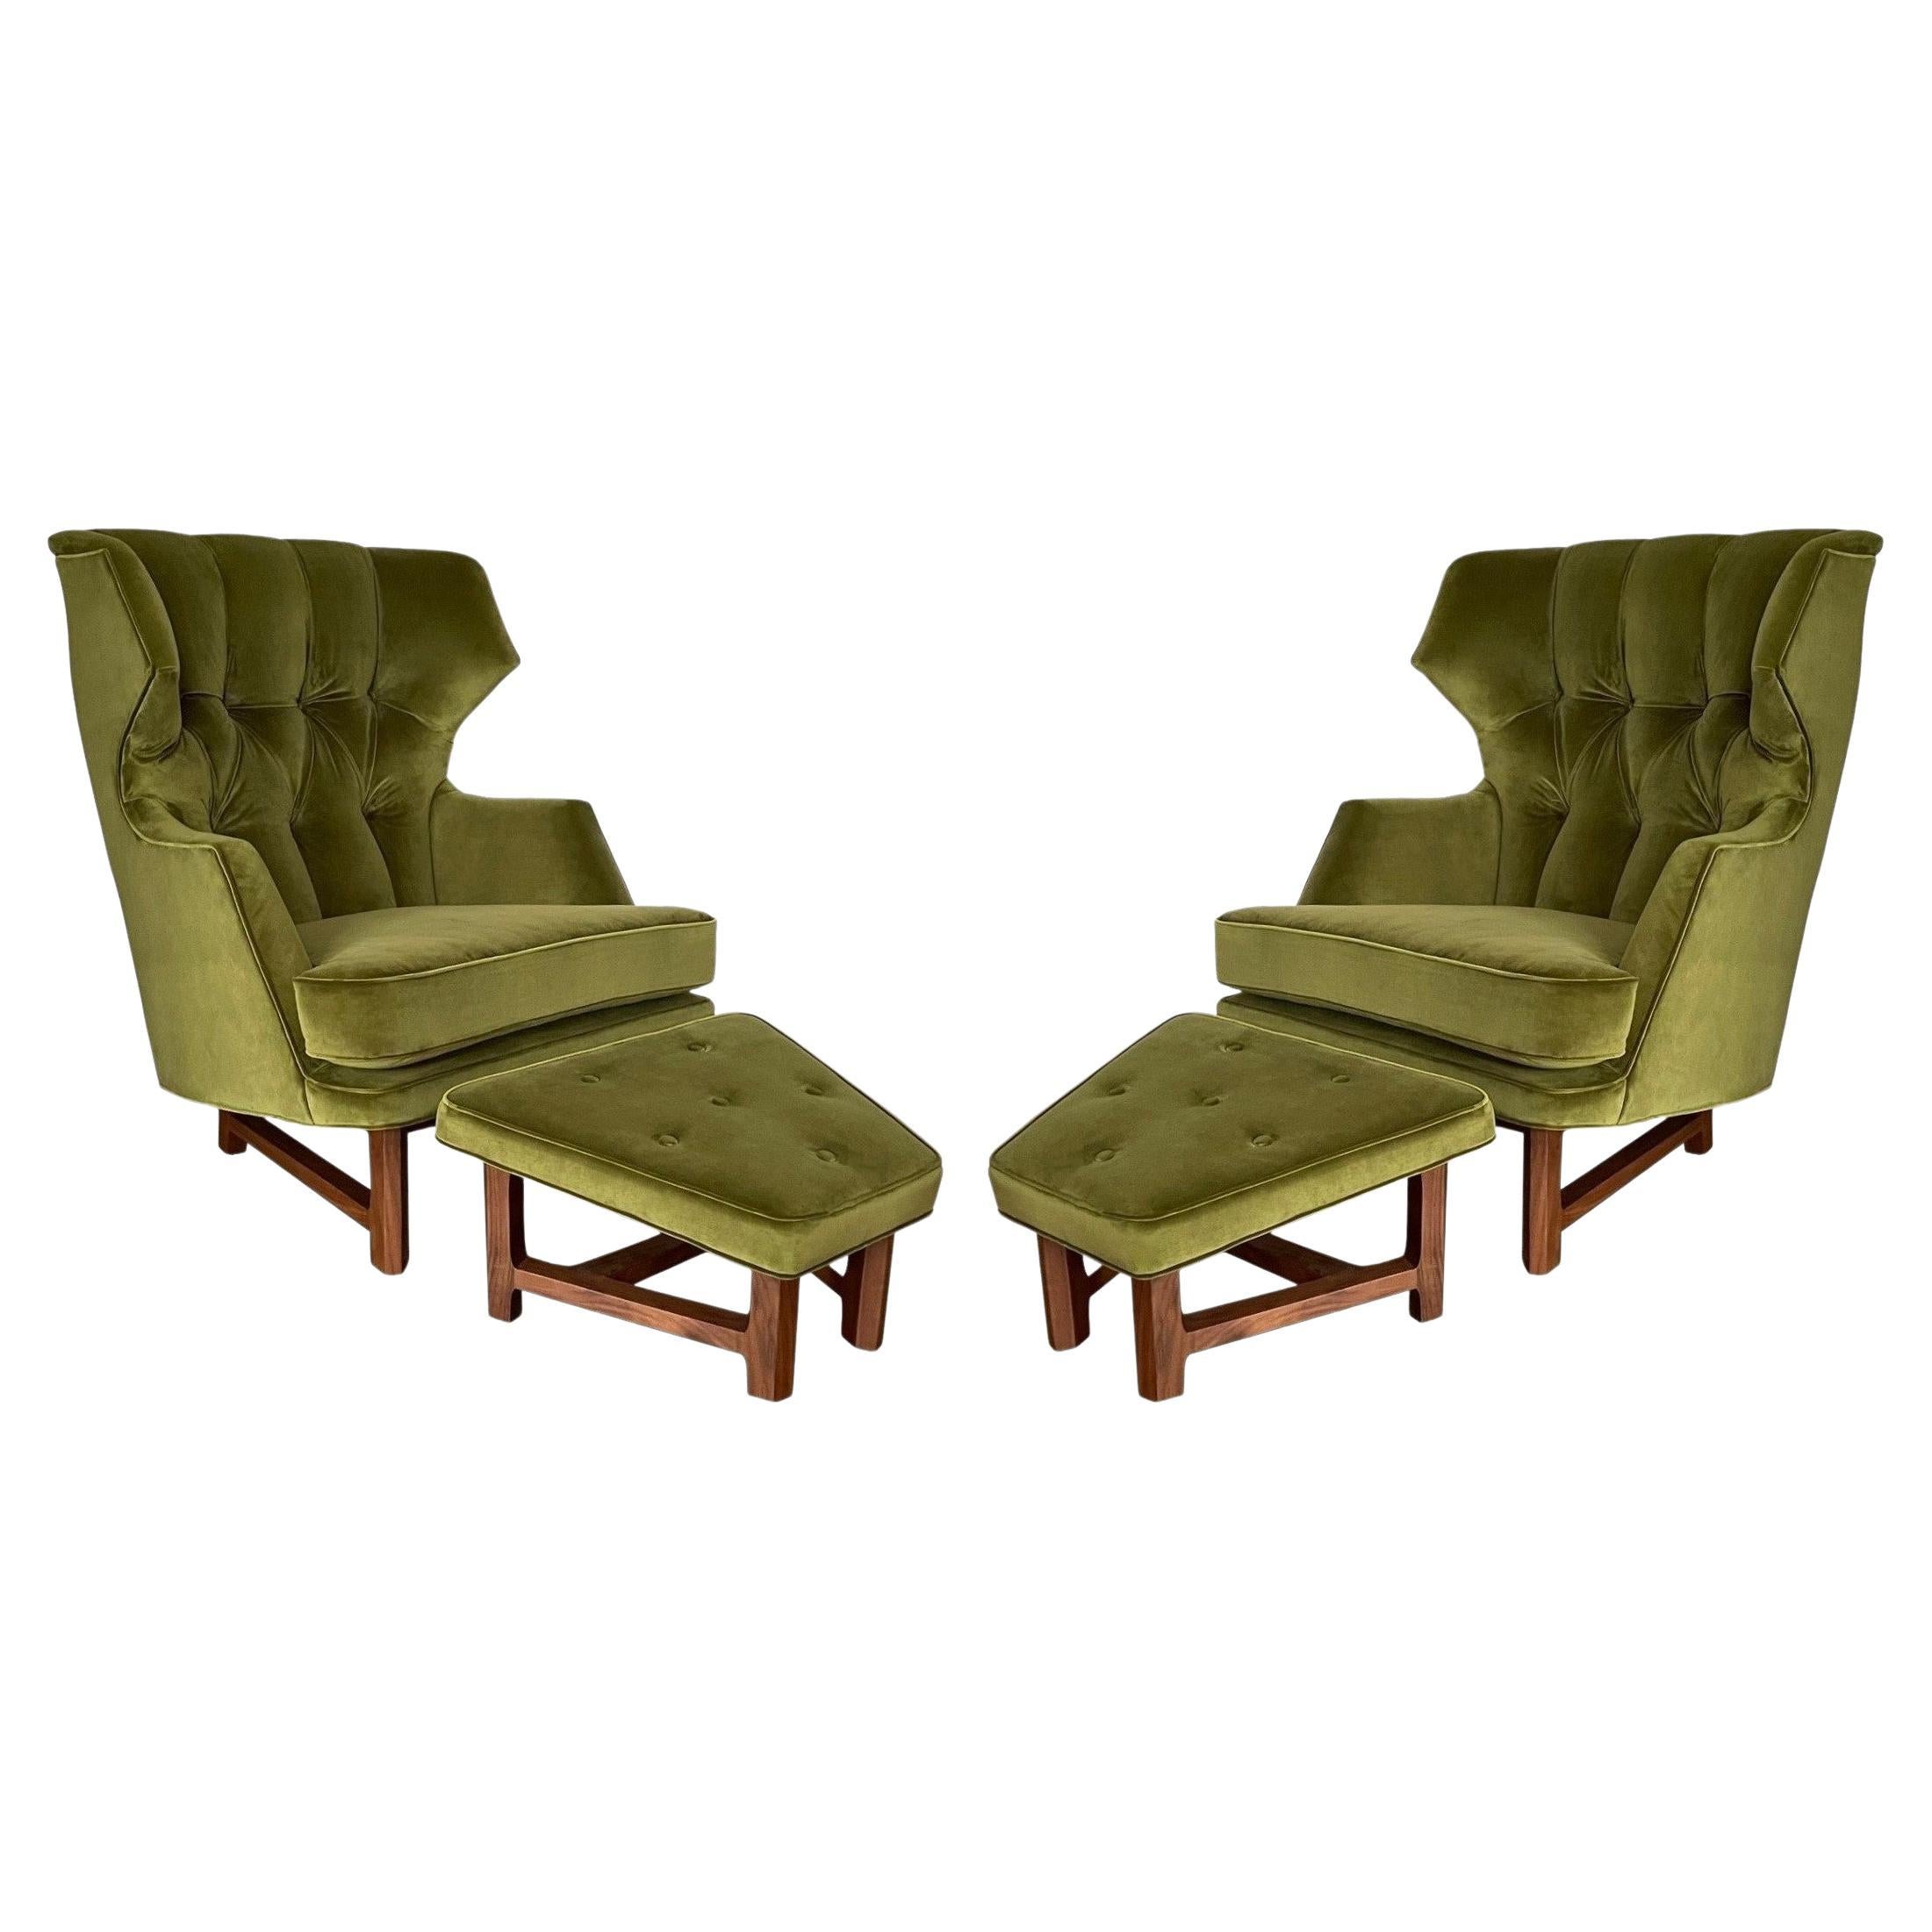 Pair Janus Wing Chairs with Ottomans by Edward Wormley for Dunbar